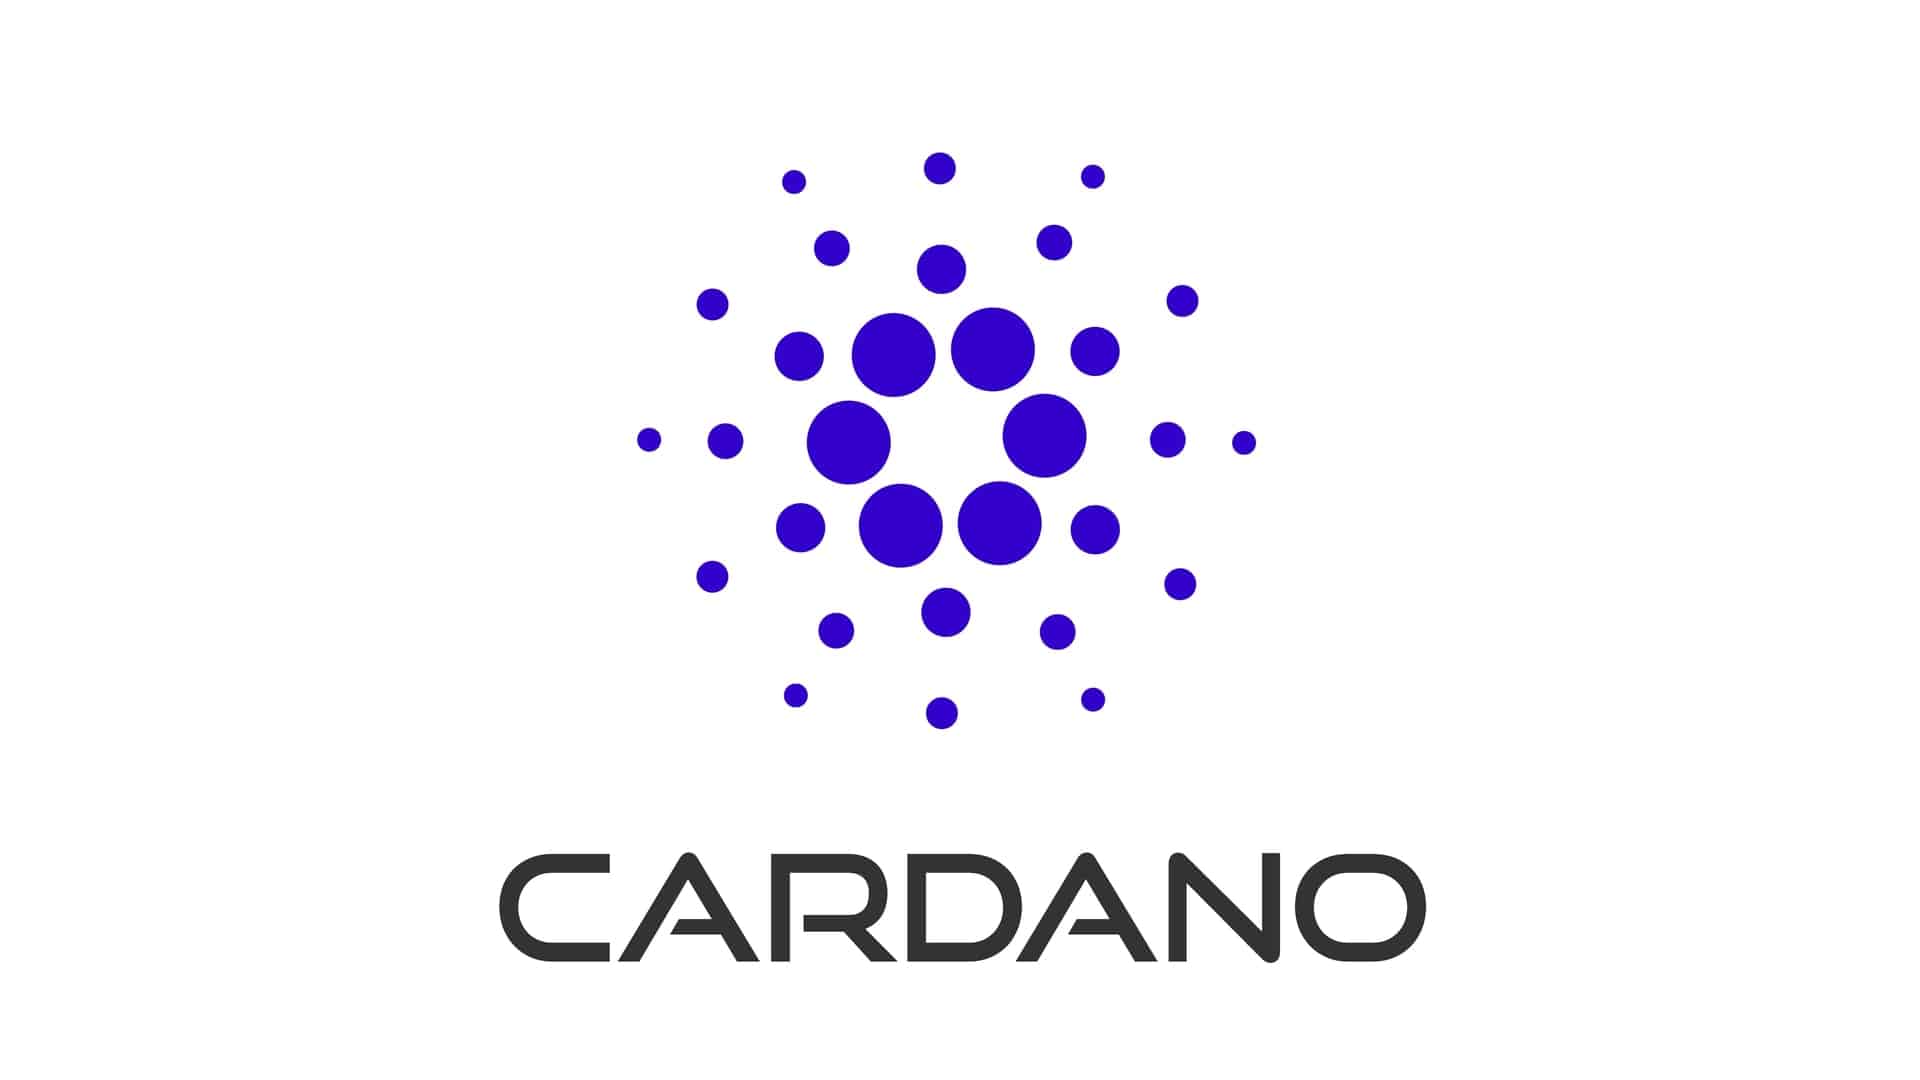 Cardano Price Fails To Reclaim $0.40: Is There More Upside?